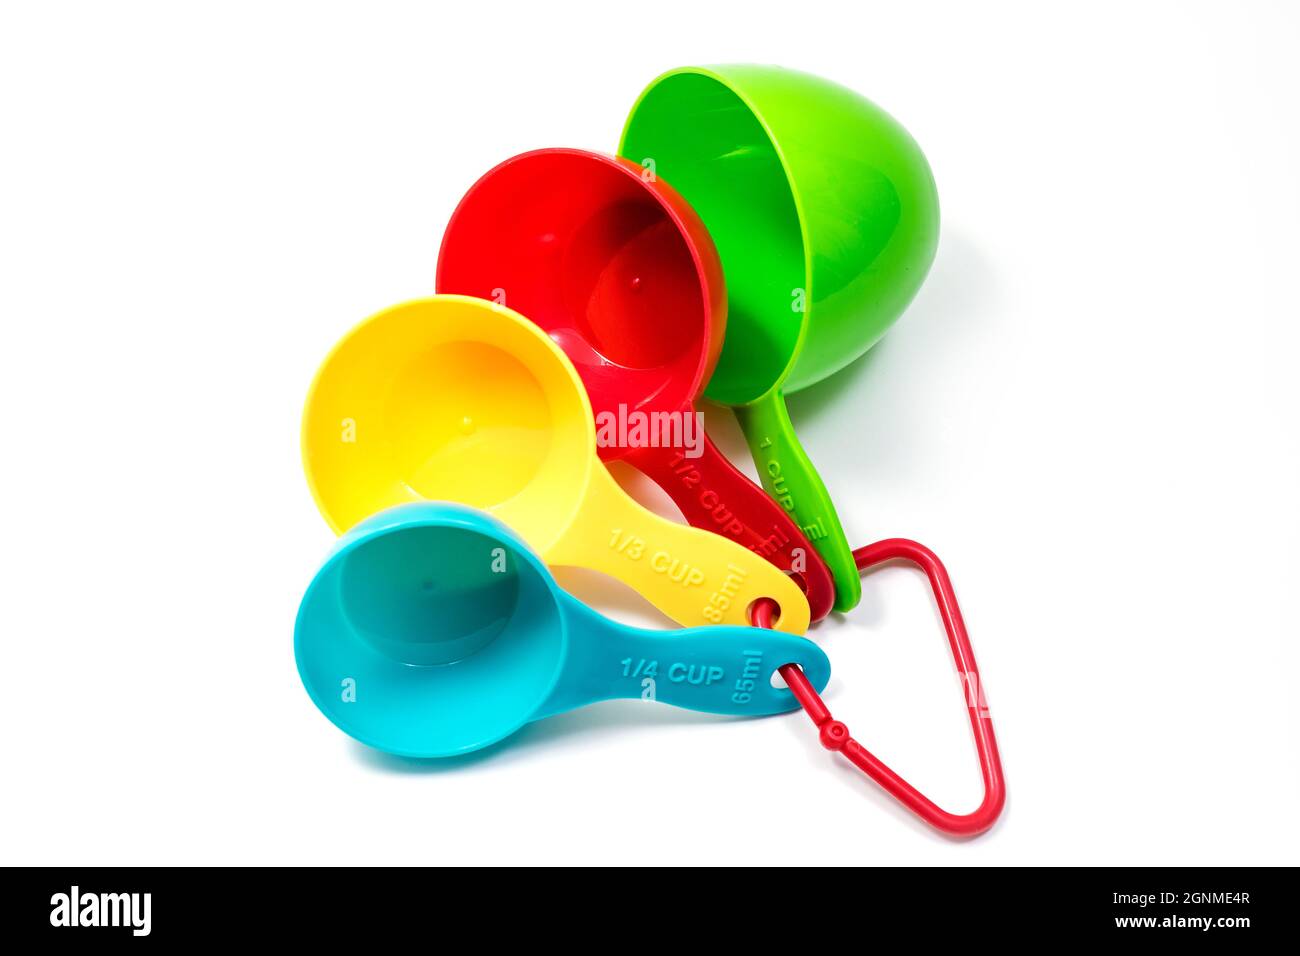 https://c8.alamy.com/comp/2GNME4R/four-pieces-of-colorful-ingredient-measuring-scoops-or-spoons-of-different-cup-sizes-connected-together-isolated-on-white-background-with-clipping-pa-2GNME4R.jpg